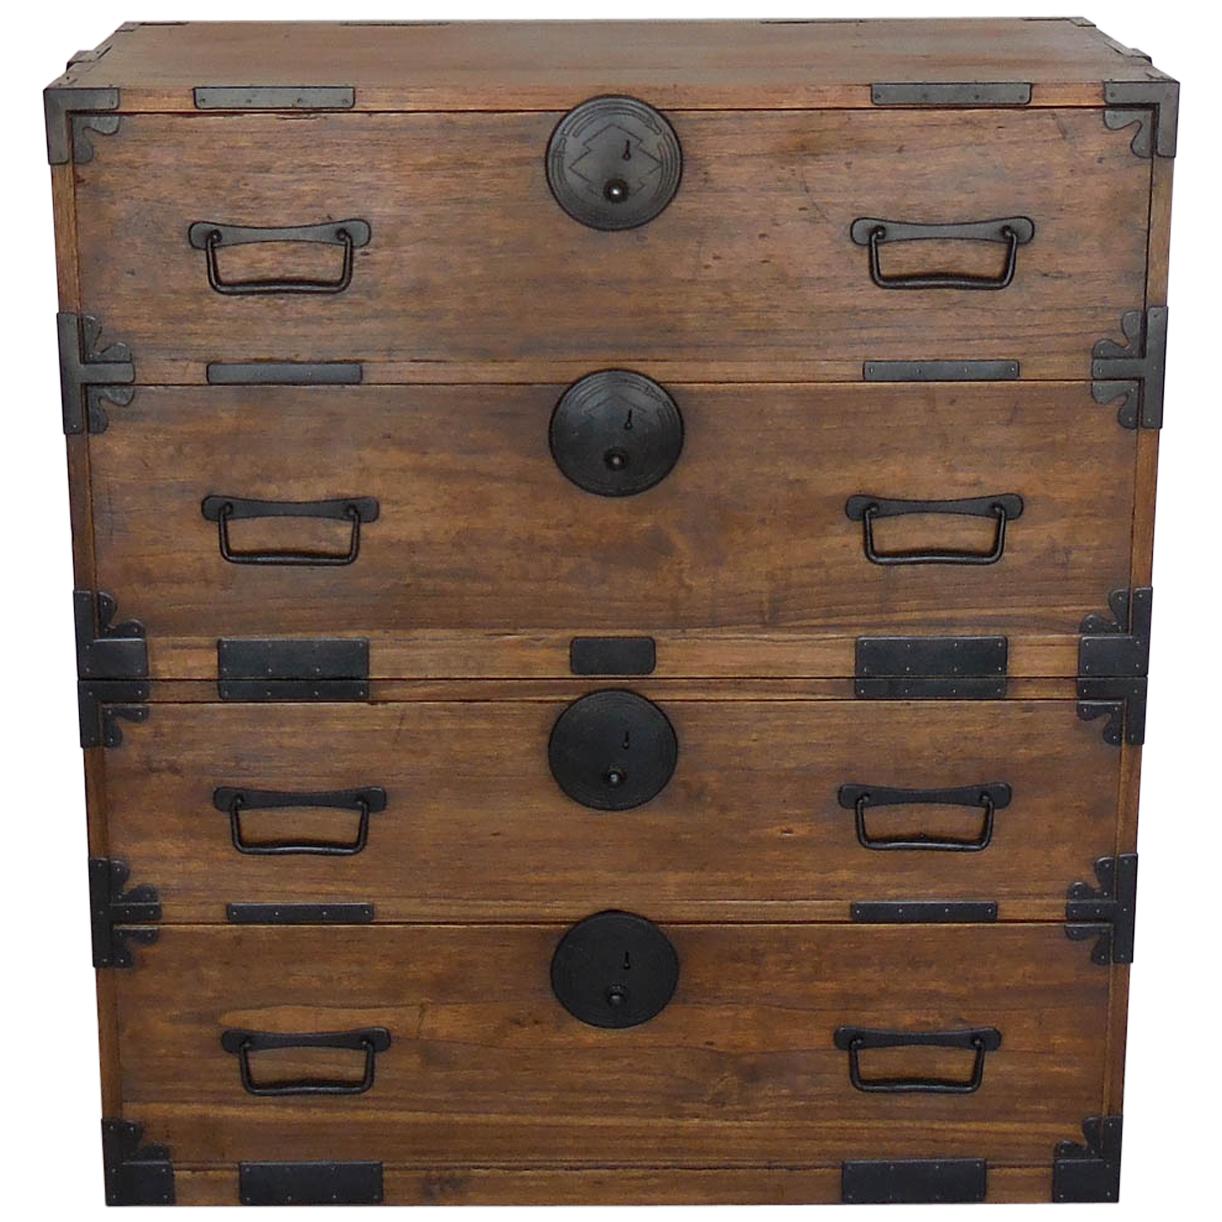 19th Century Japanese Shop Tansu, Chest of Drawers